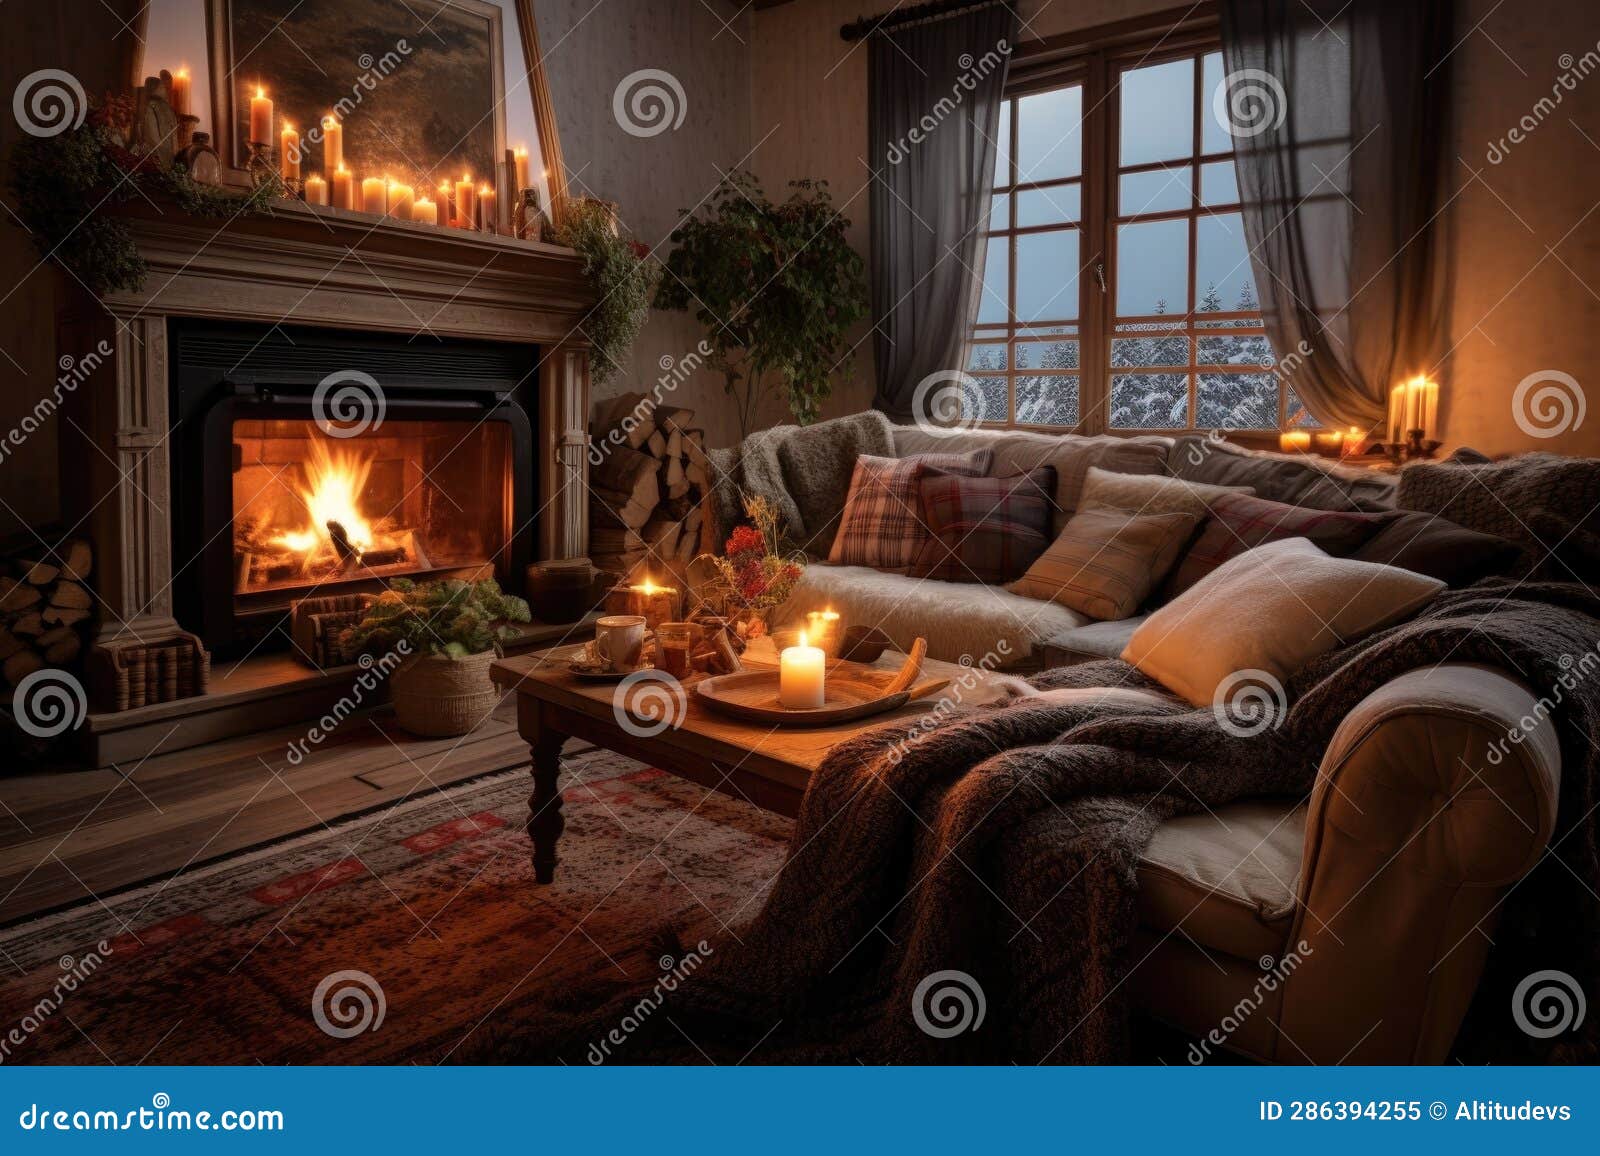 Premium AI Image  A warm room with a fireplace and a blanket on